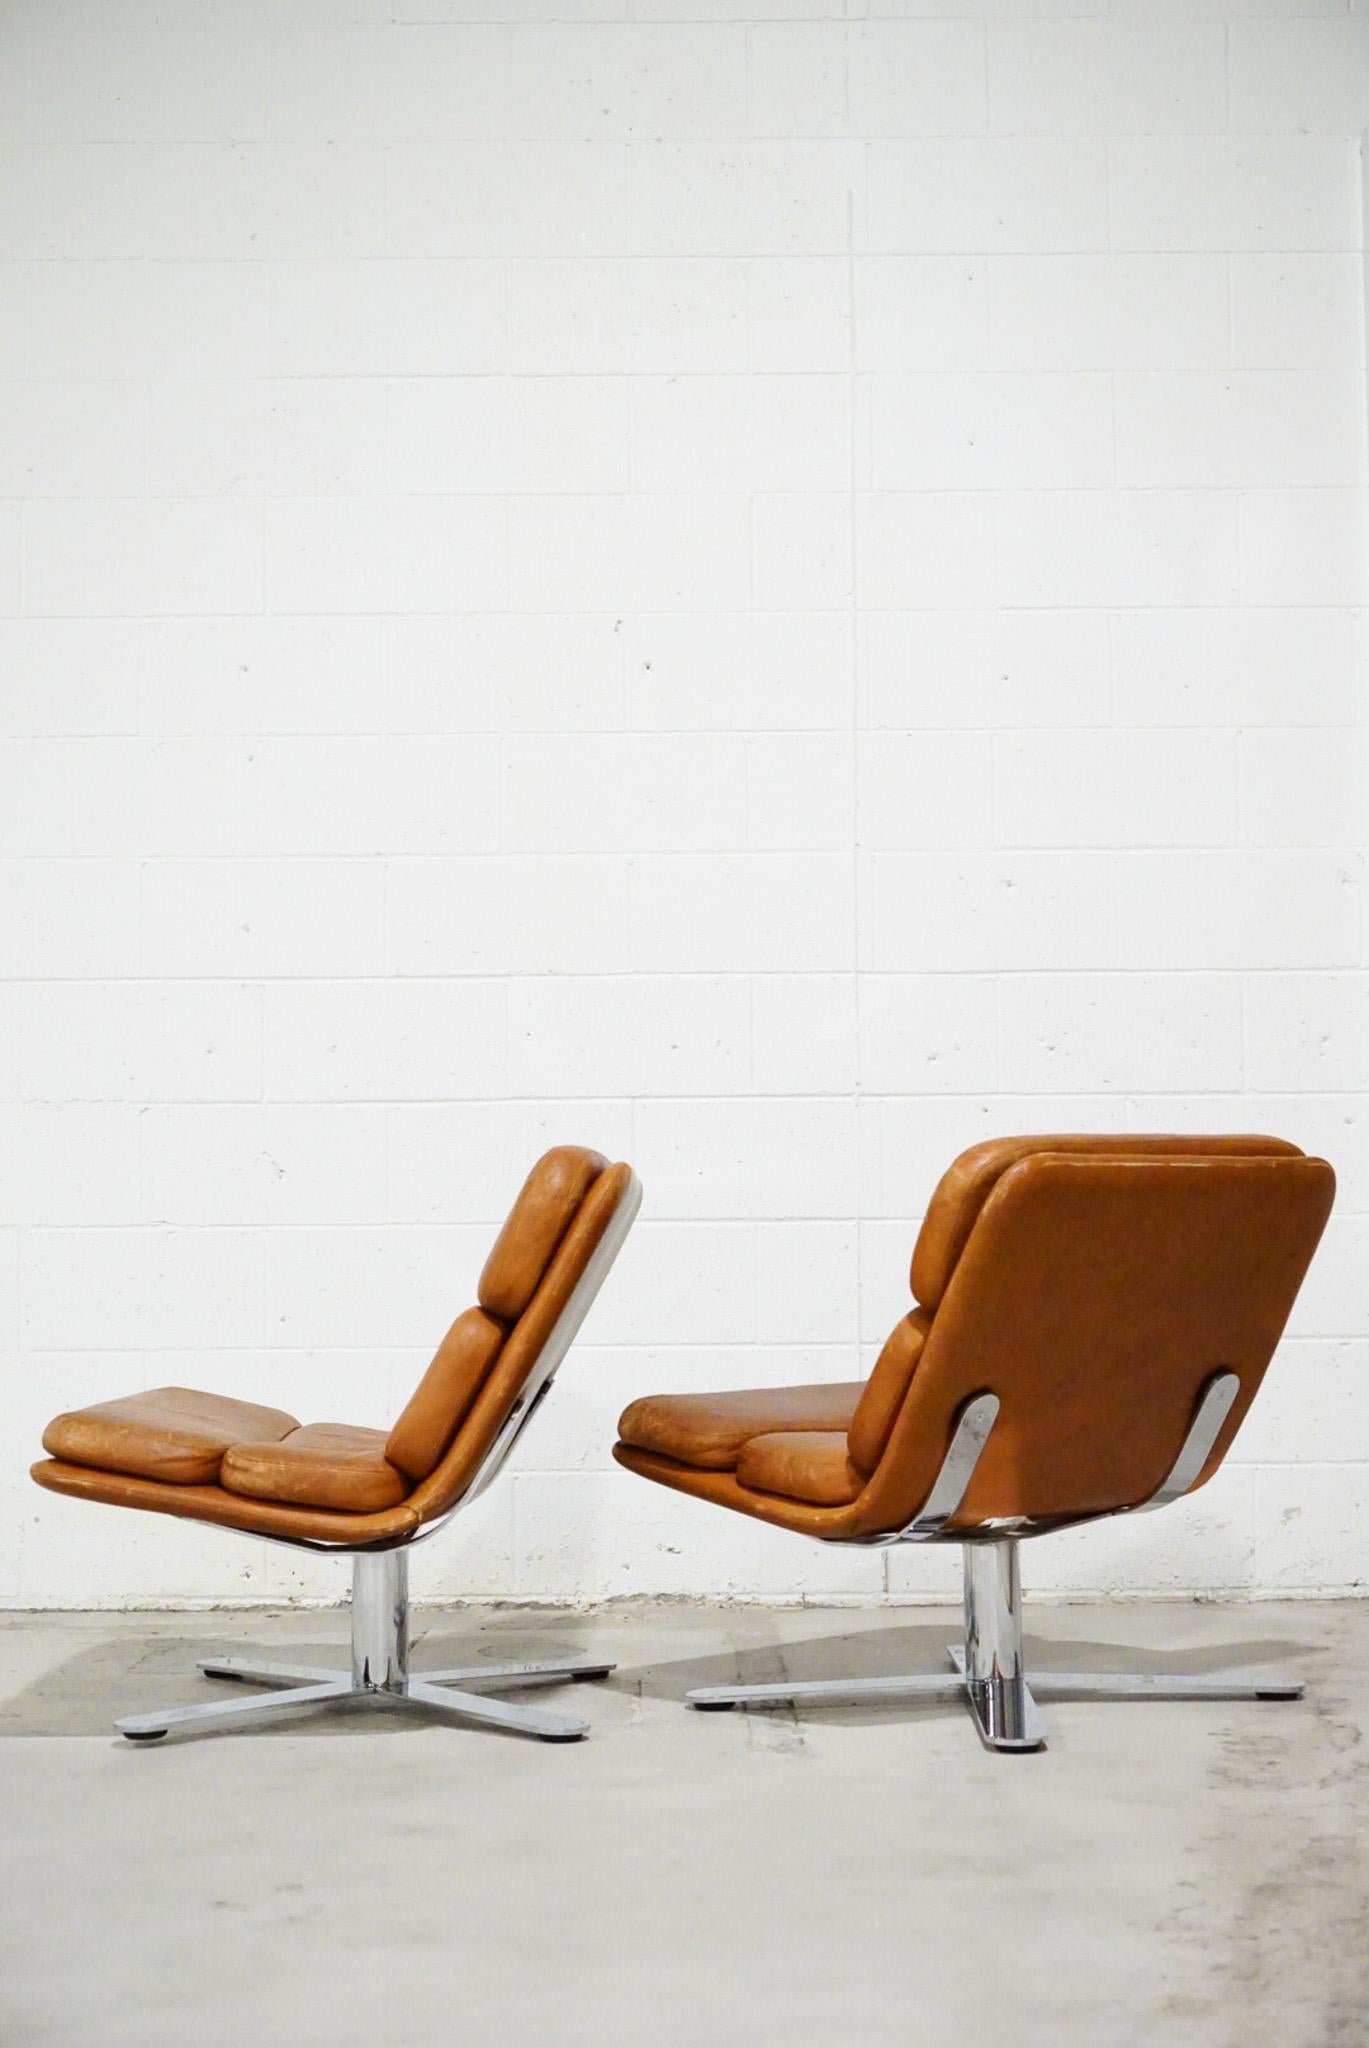 American John Follis Pair of Patinated Leather Lounge Chairs, 1970s California